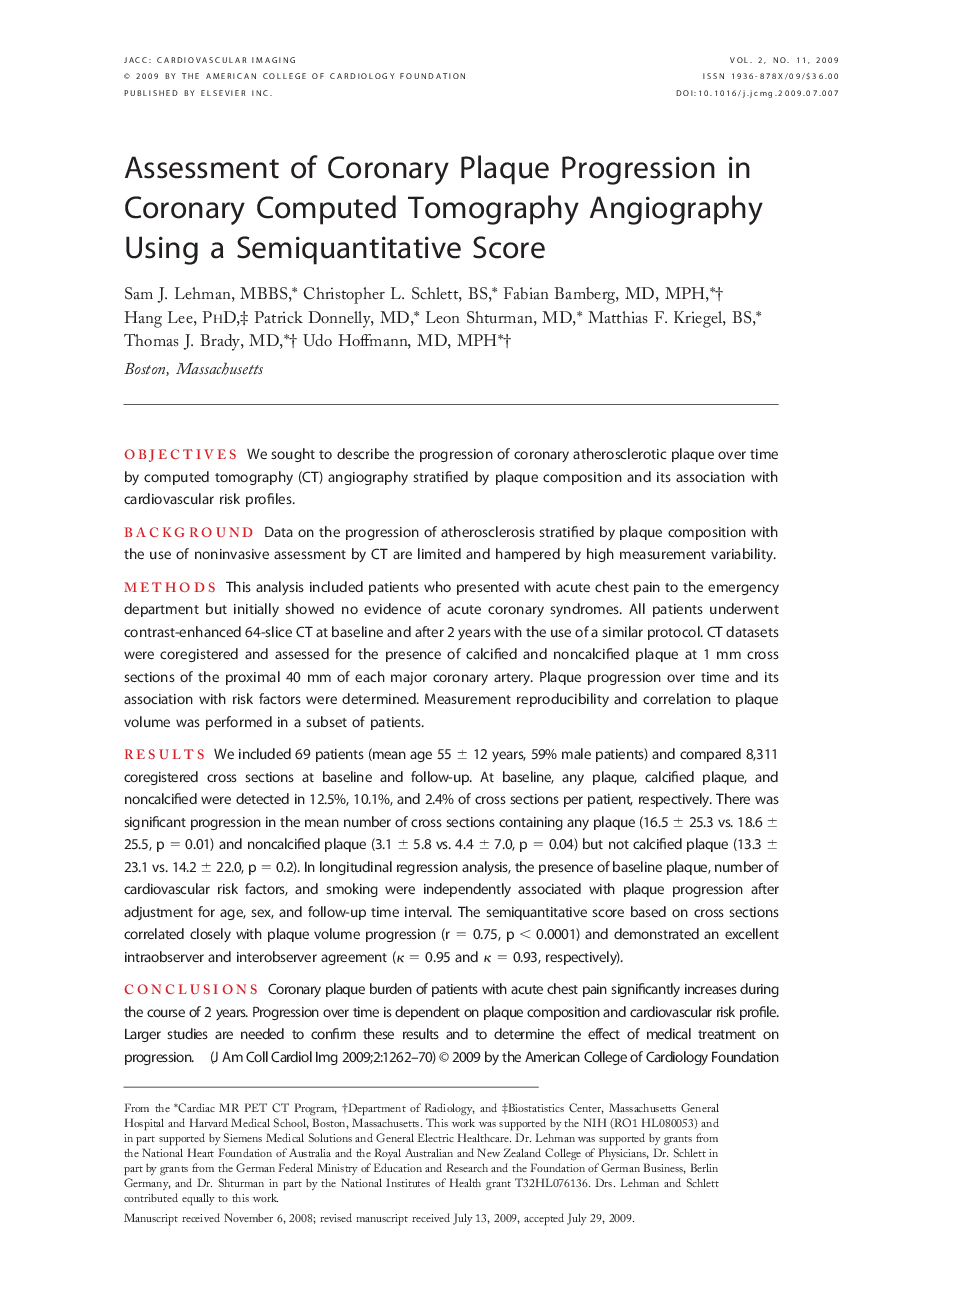 Assessment of Coronary Plaque Progression in Coronary Computed Tomography Angiography Using a Semiquantitative Score 